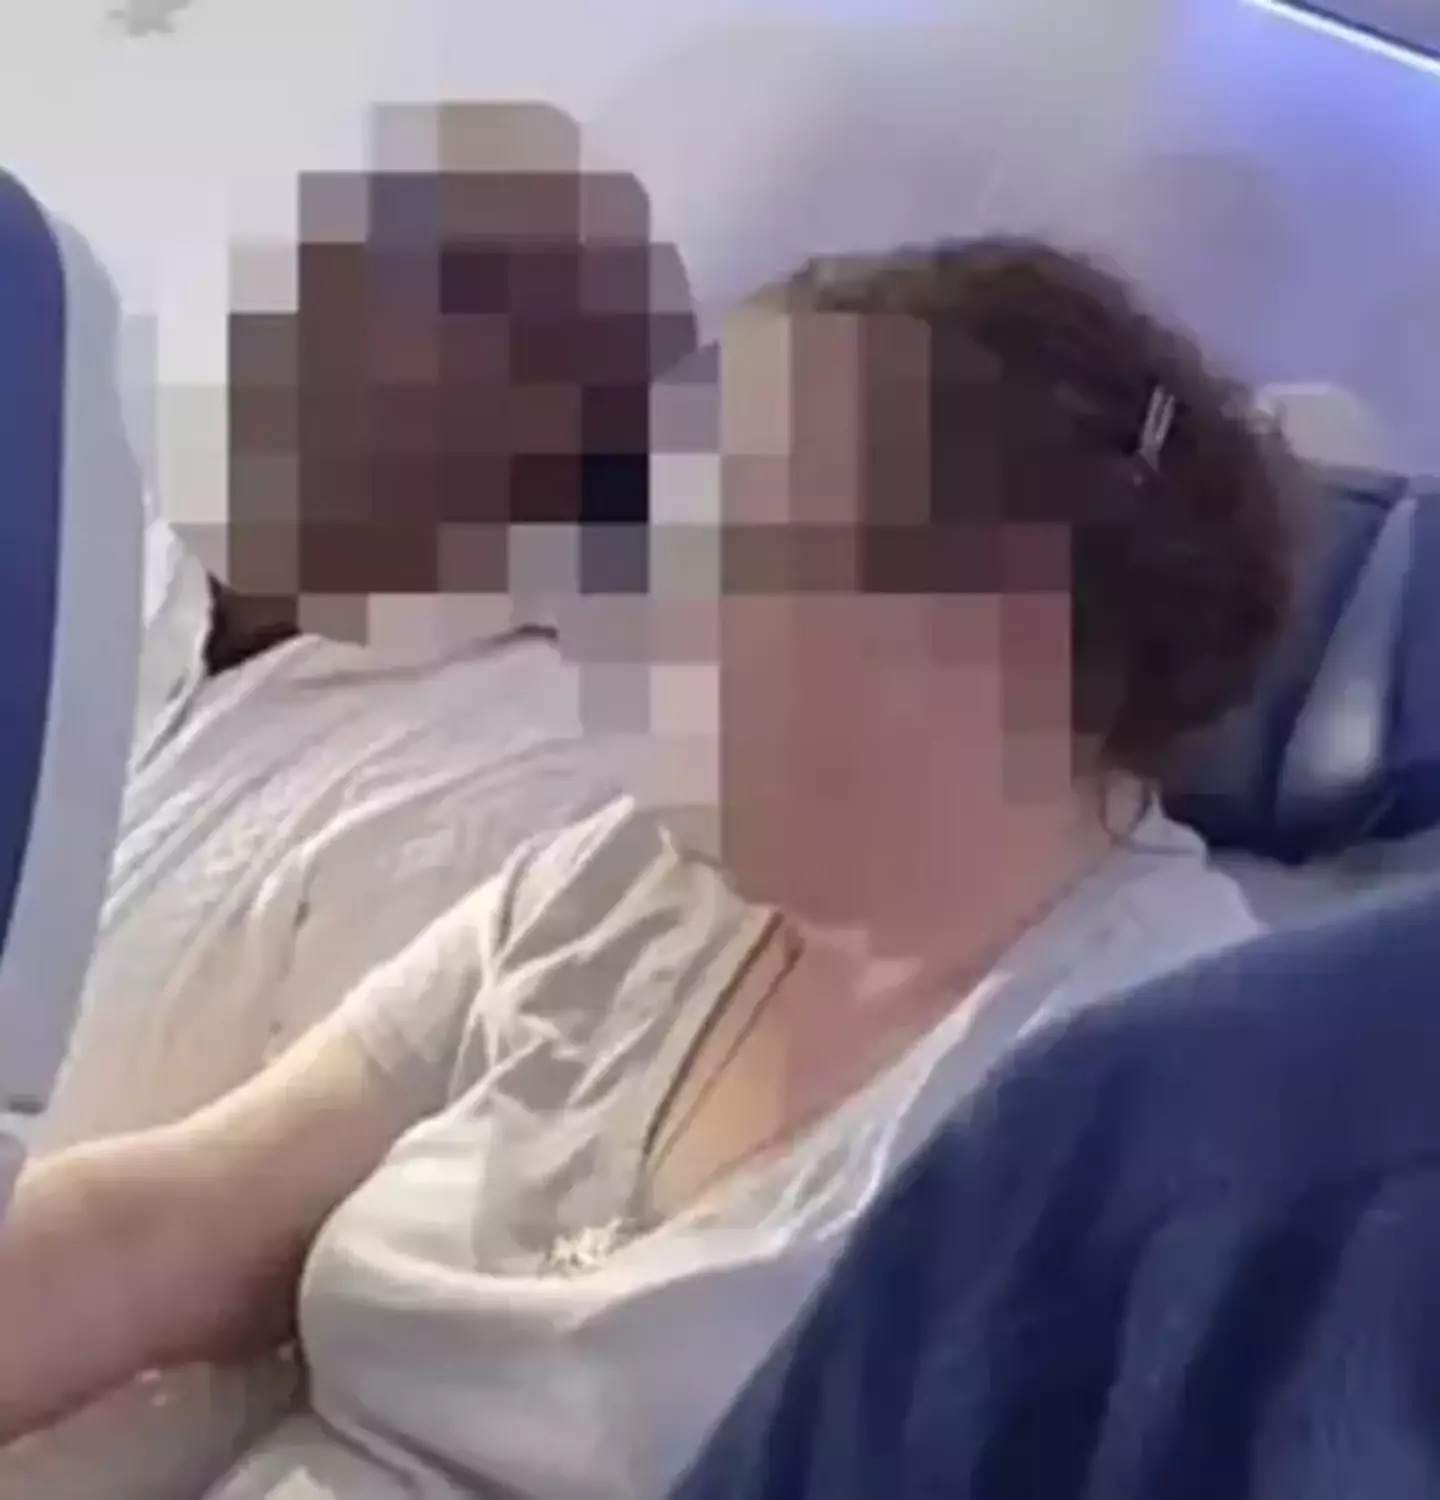 The passenger was sat with a woman assumed to be his wife when he launched into a furious rant at a crying baby.